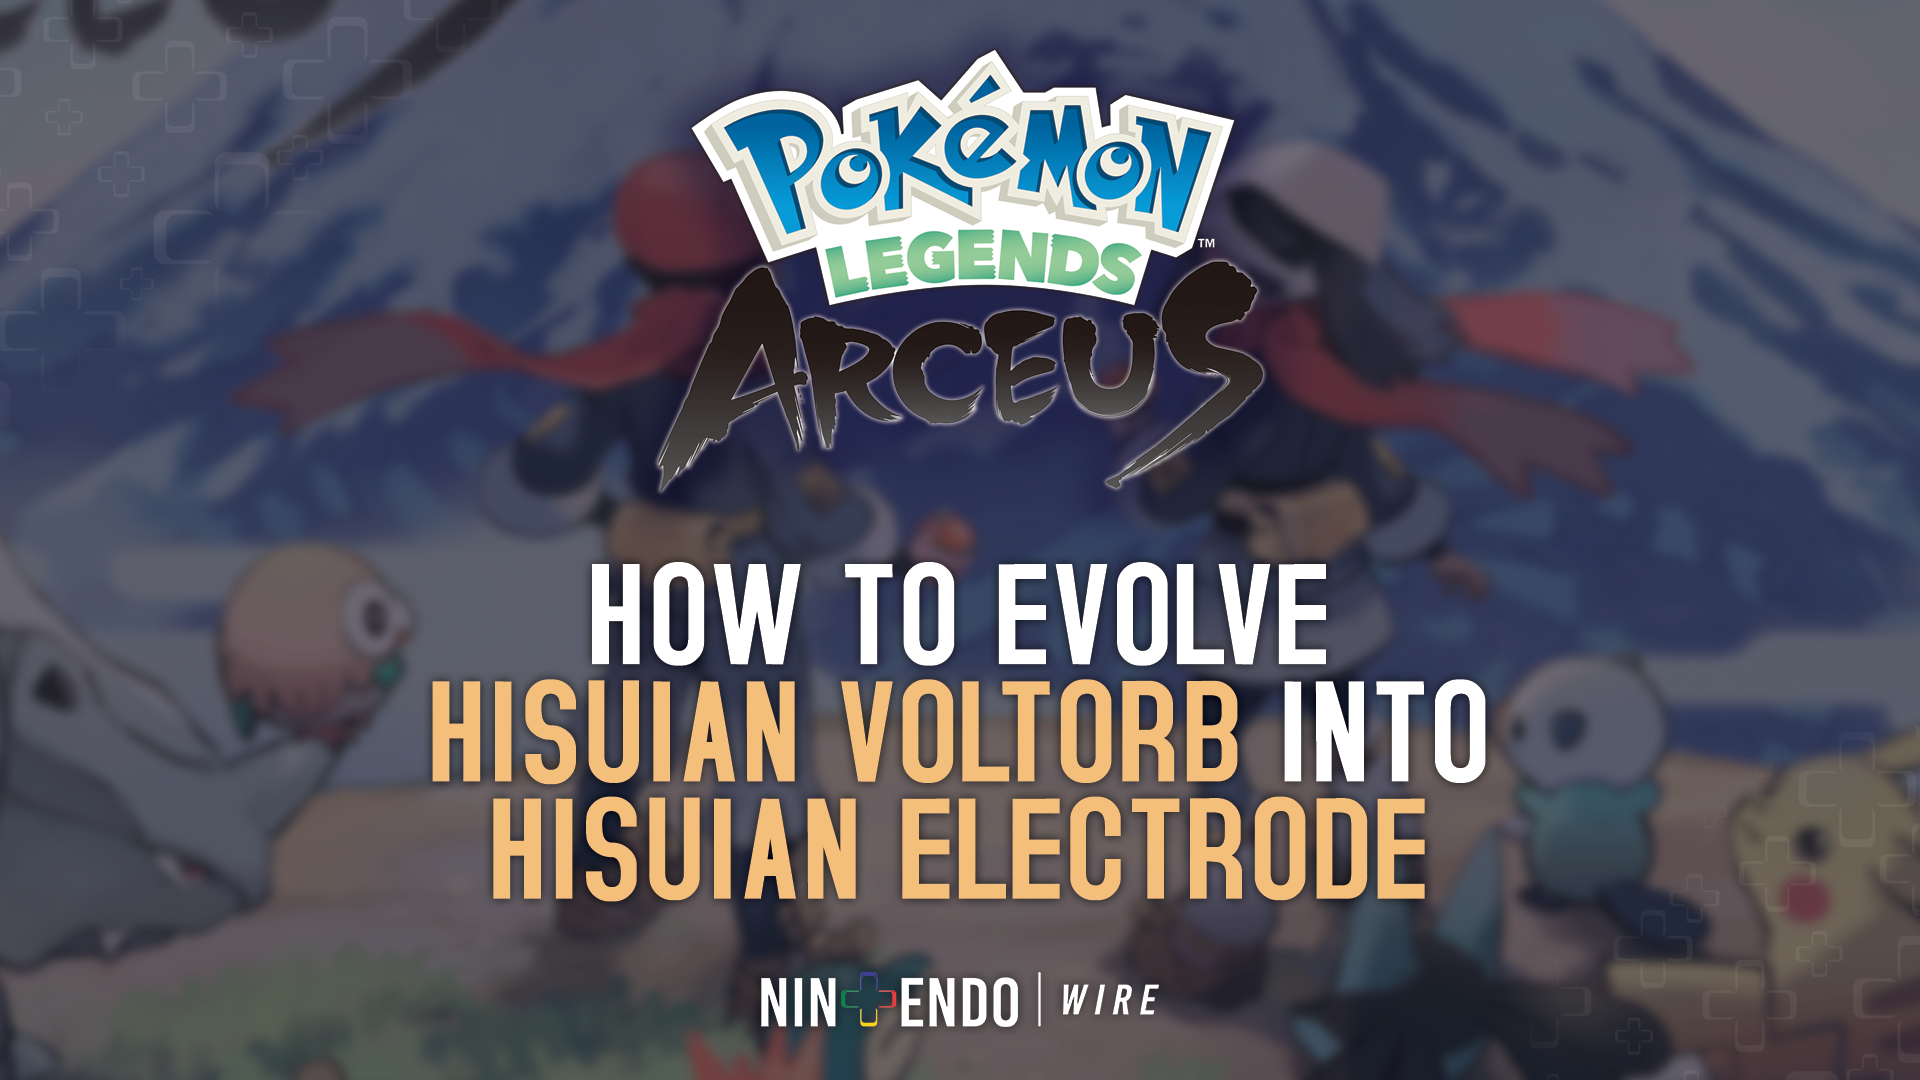 Pokemon Go: Can You Evolve Hisuian Voltorb into Electrode?